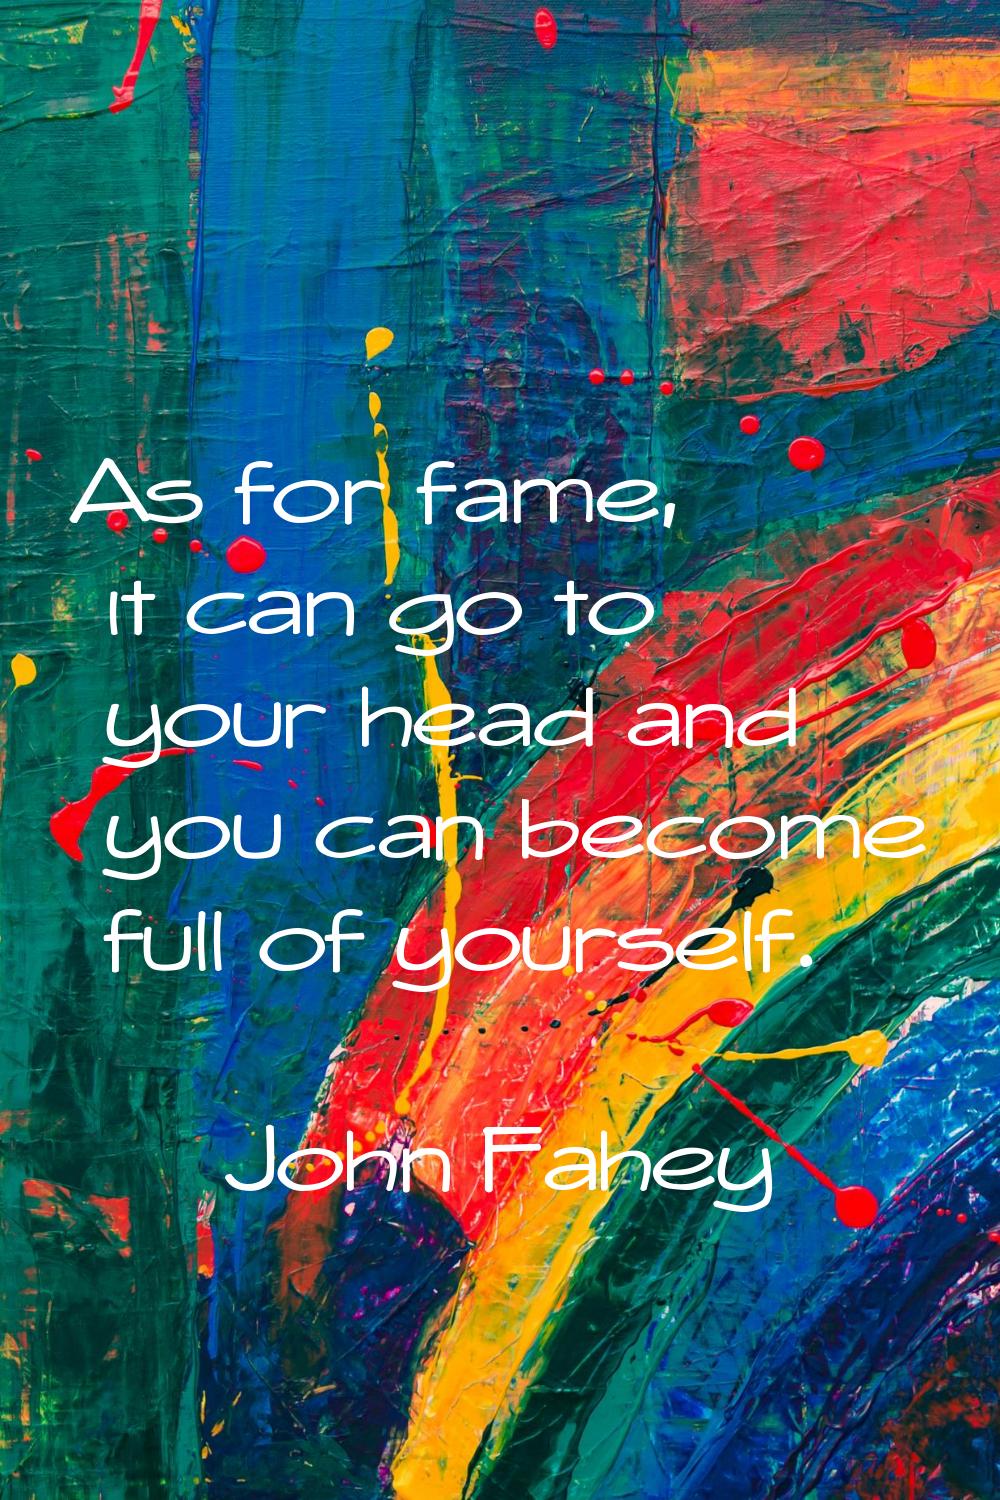 As for fame, it can go to your head and you can become full of yourself.